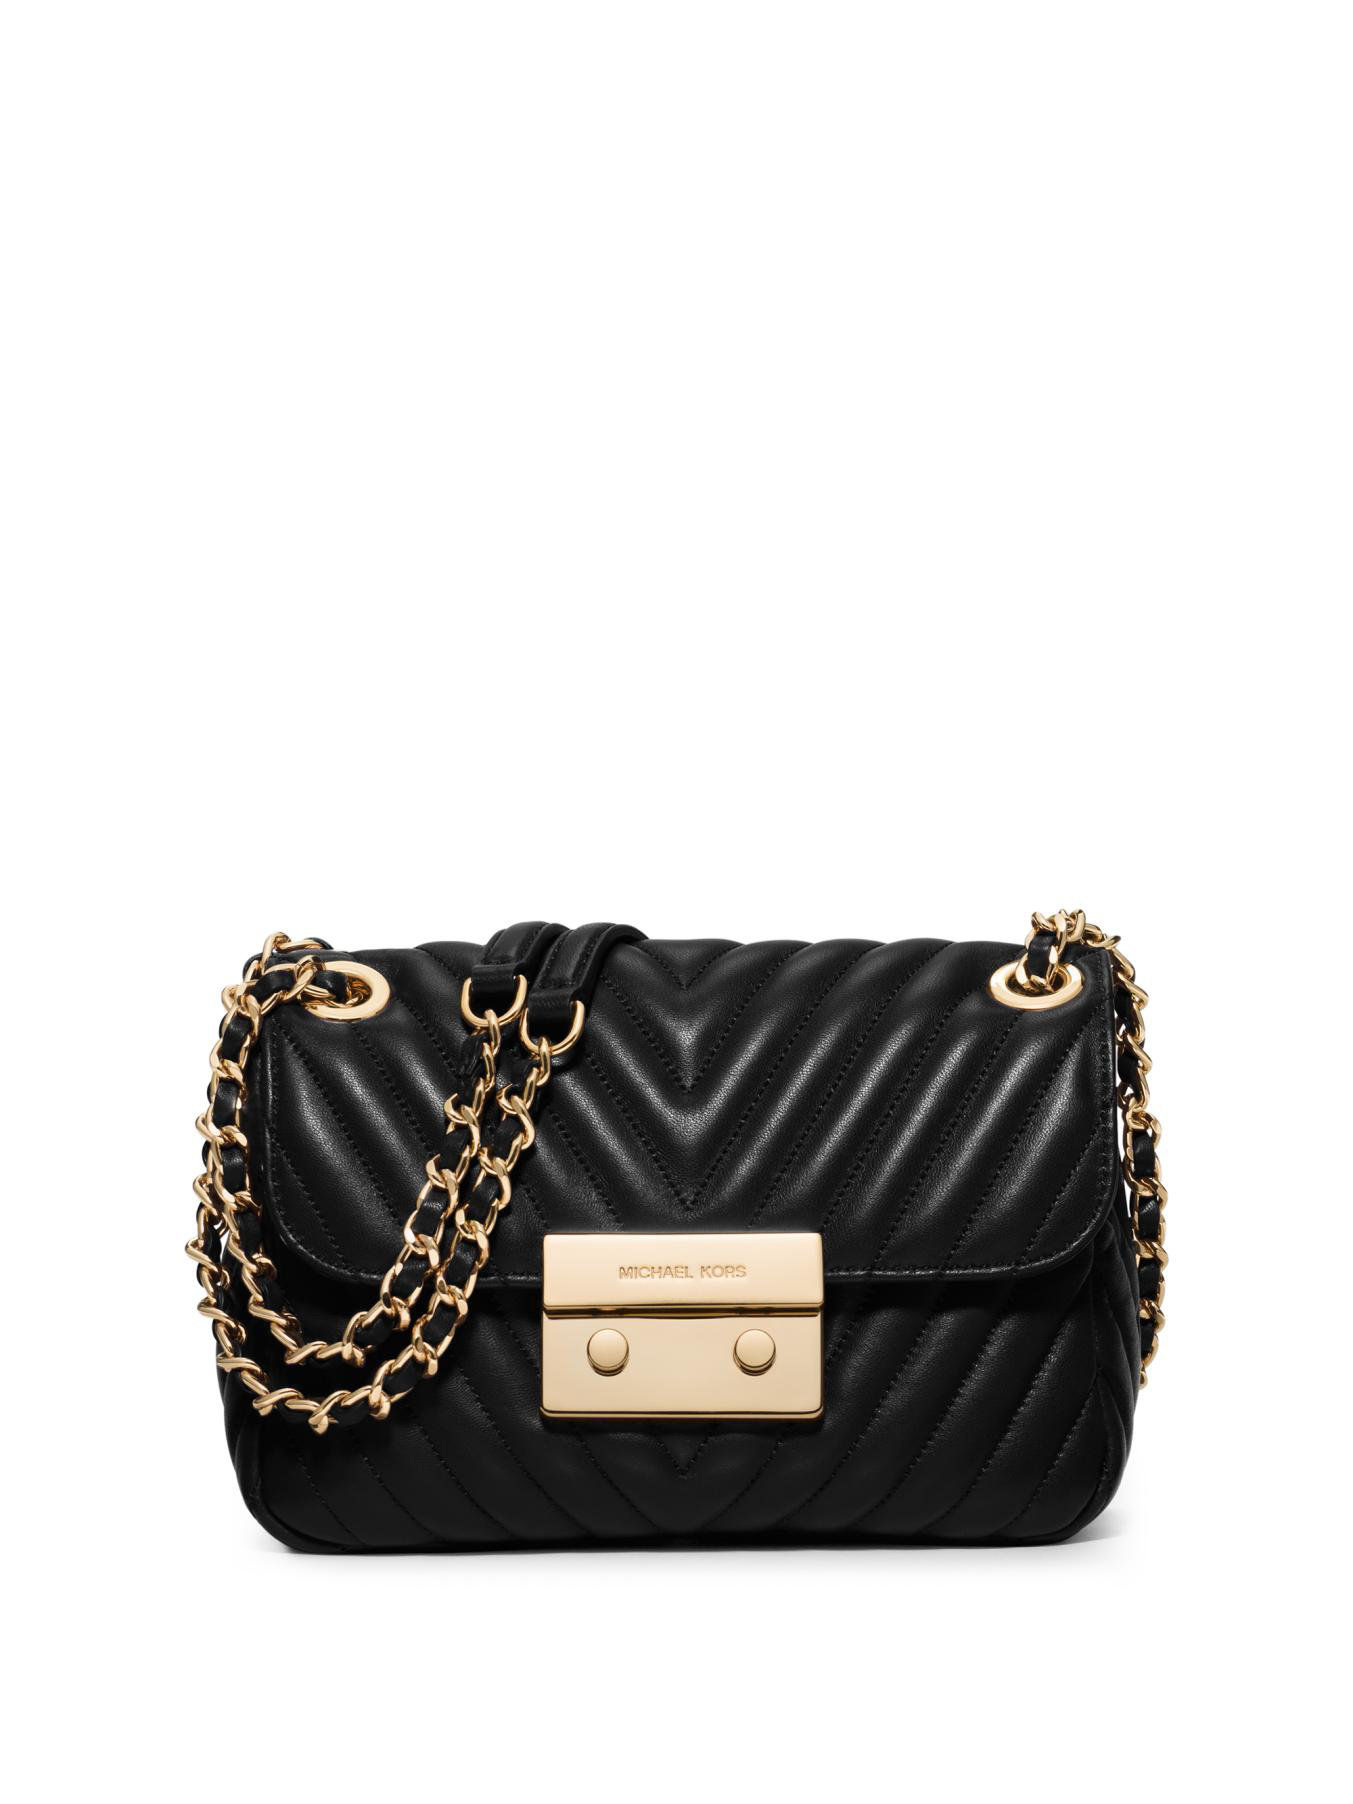 Lyst - Michael Michael Kors Sloan Small Quilted Leather Crossbody Bag in Black